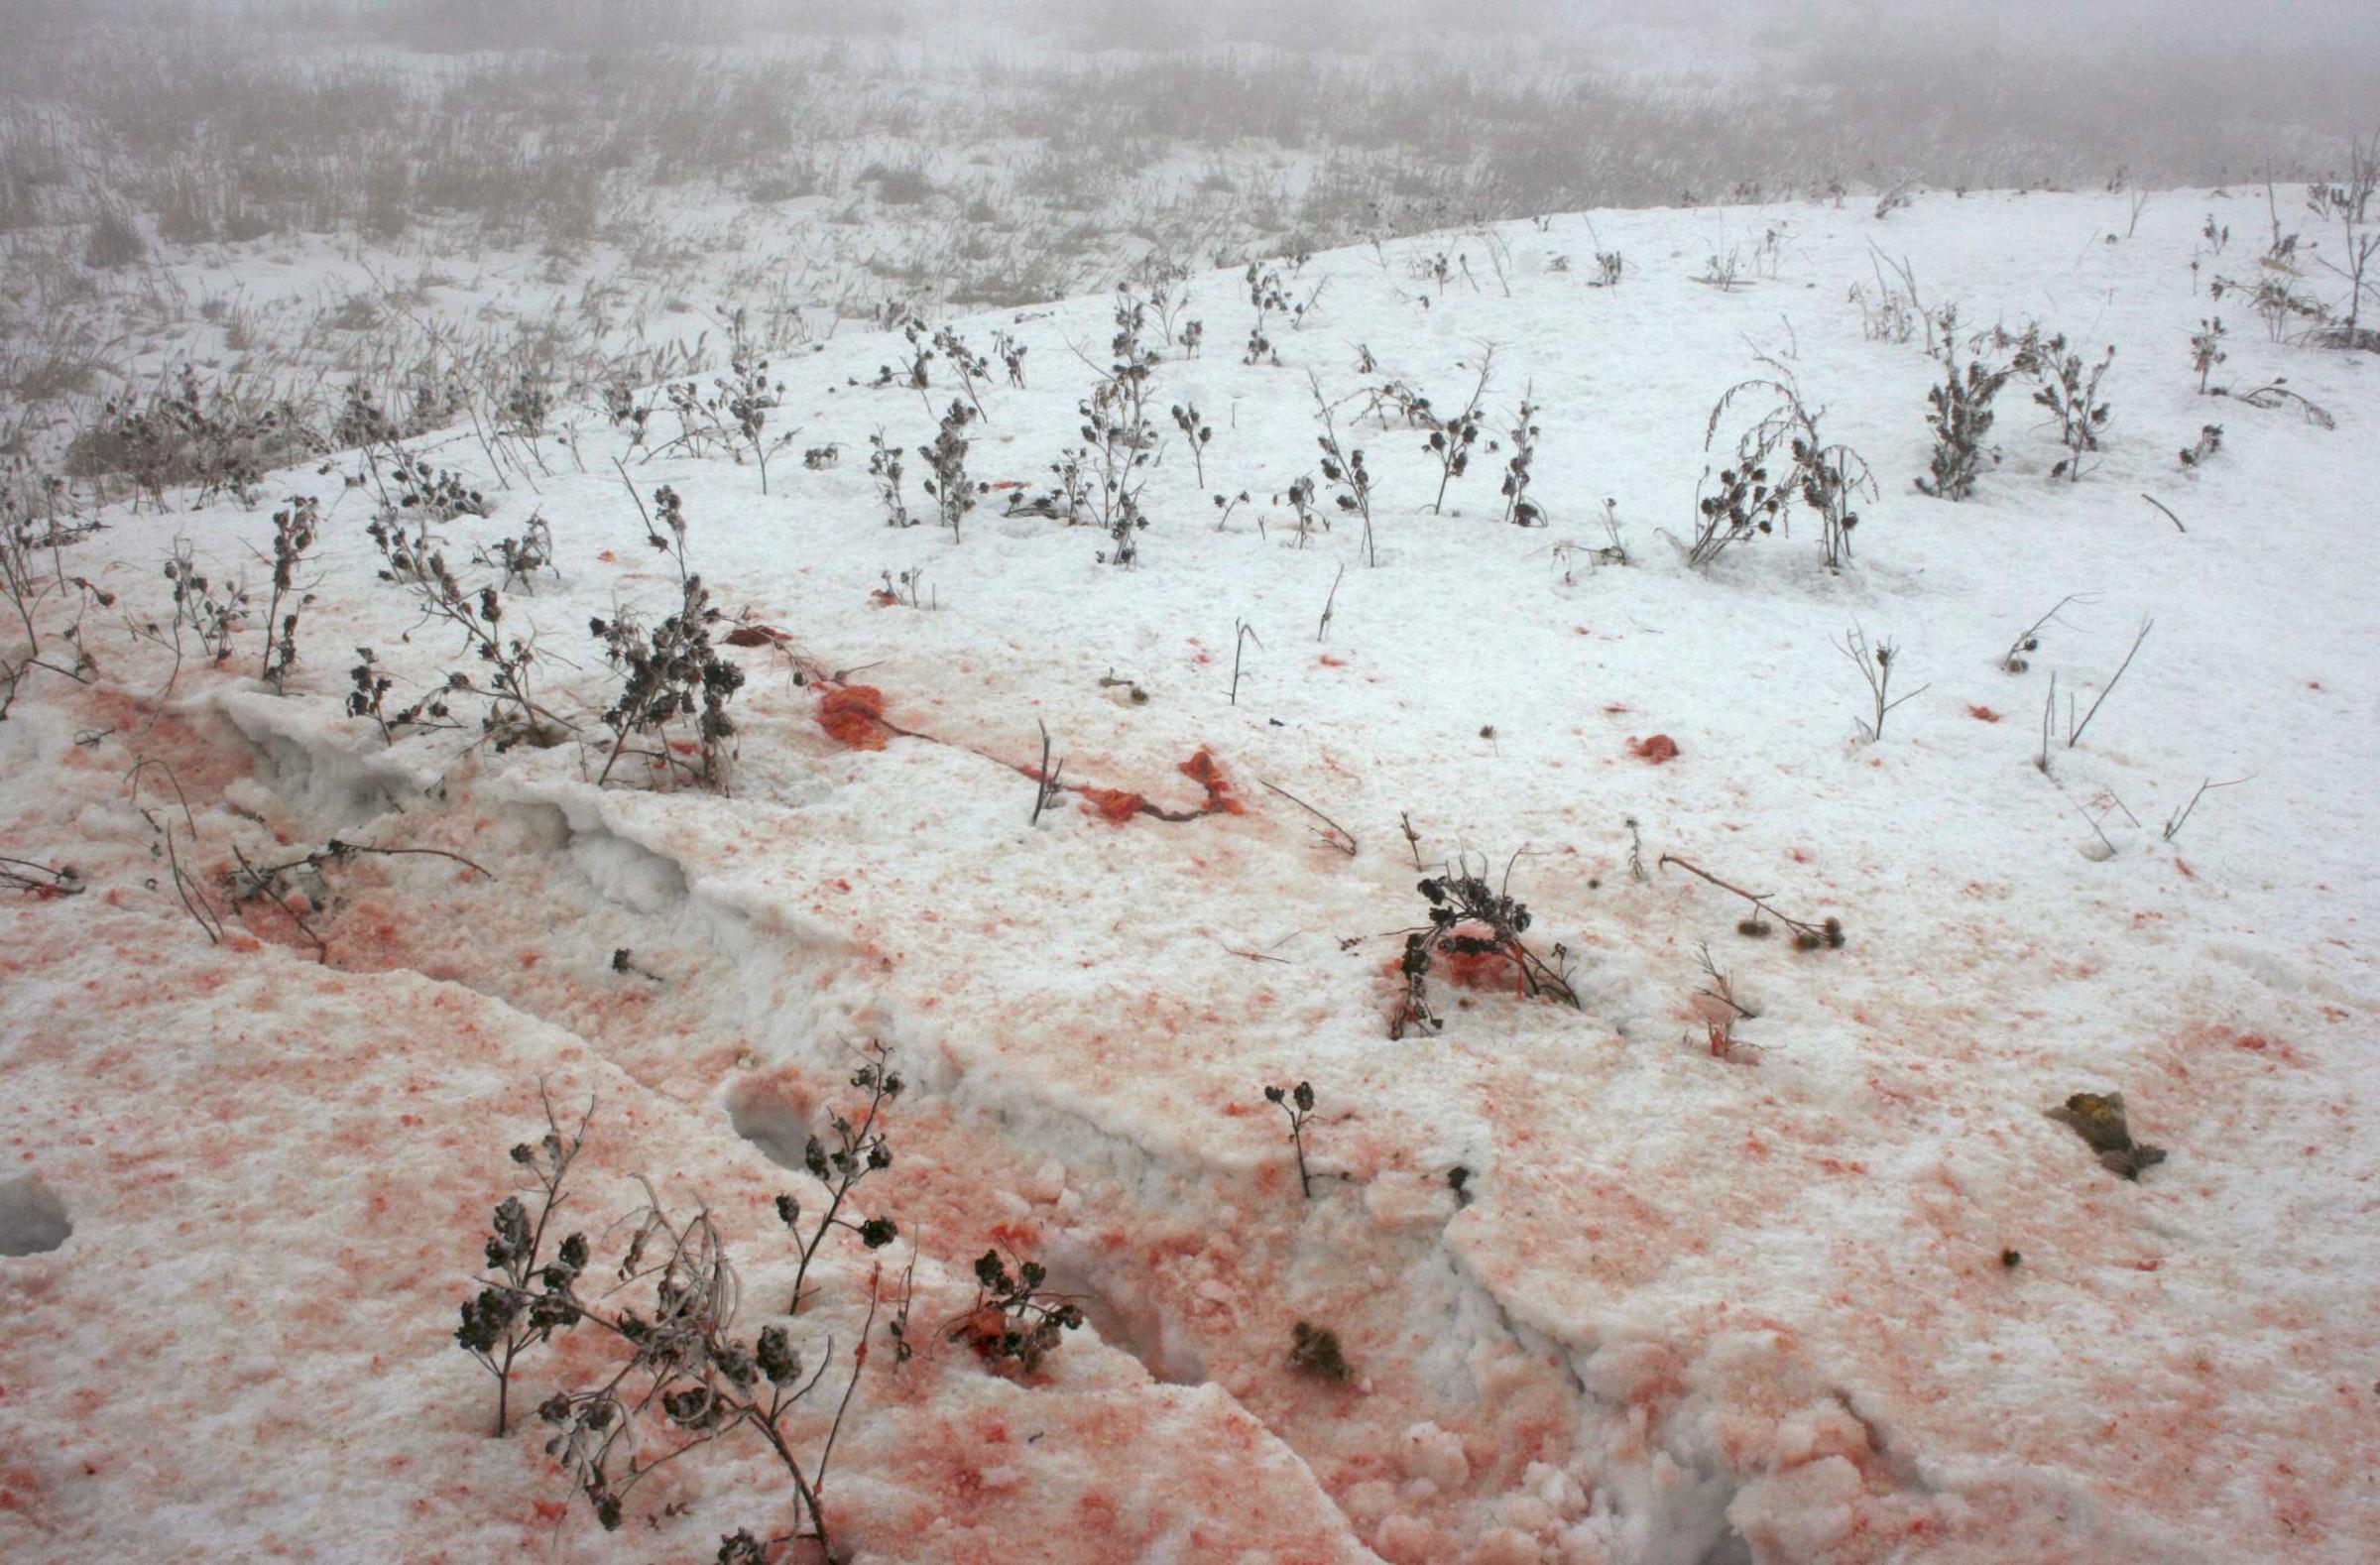 Blood stains are seen on snow at the site of a plane crash outside Almaty